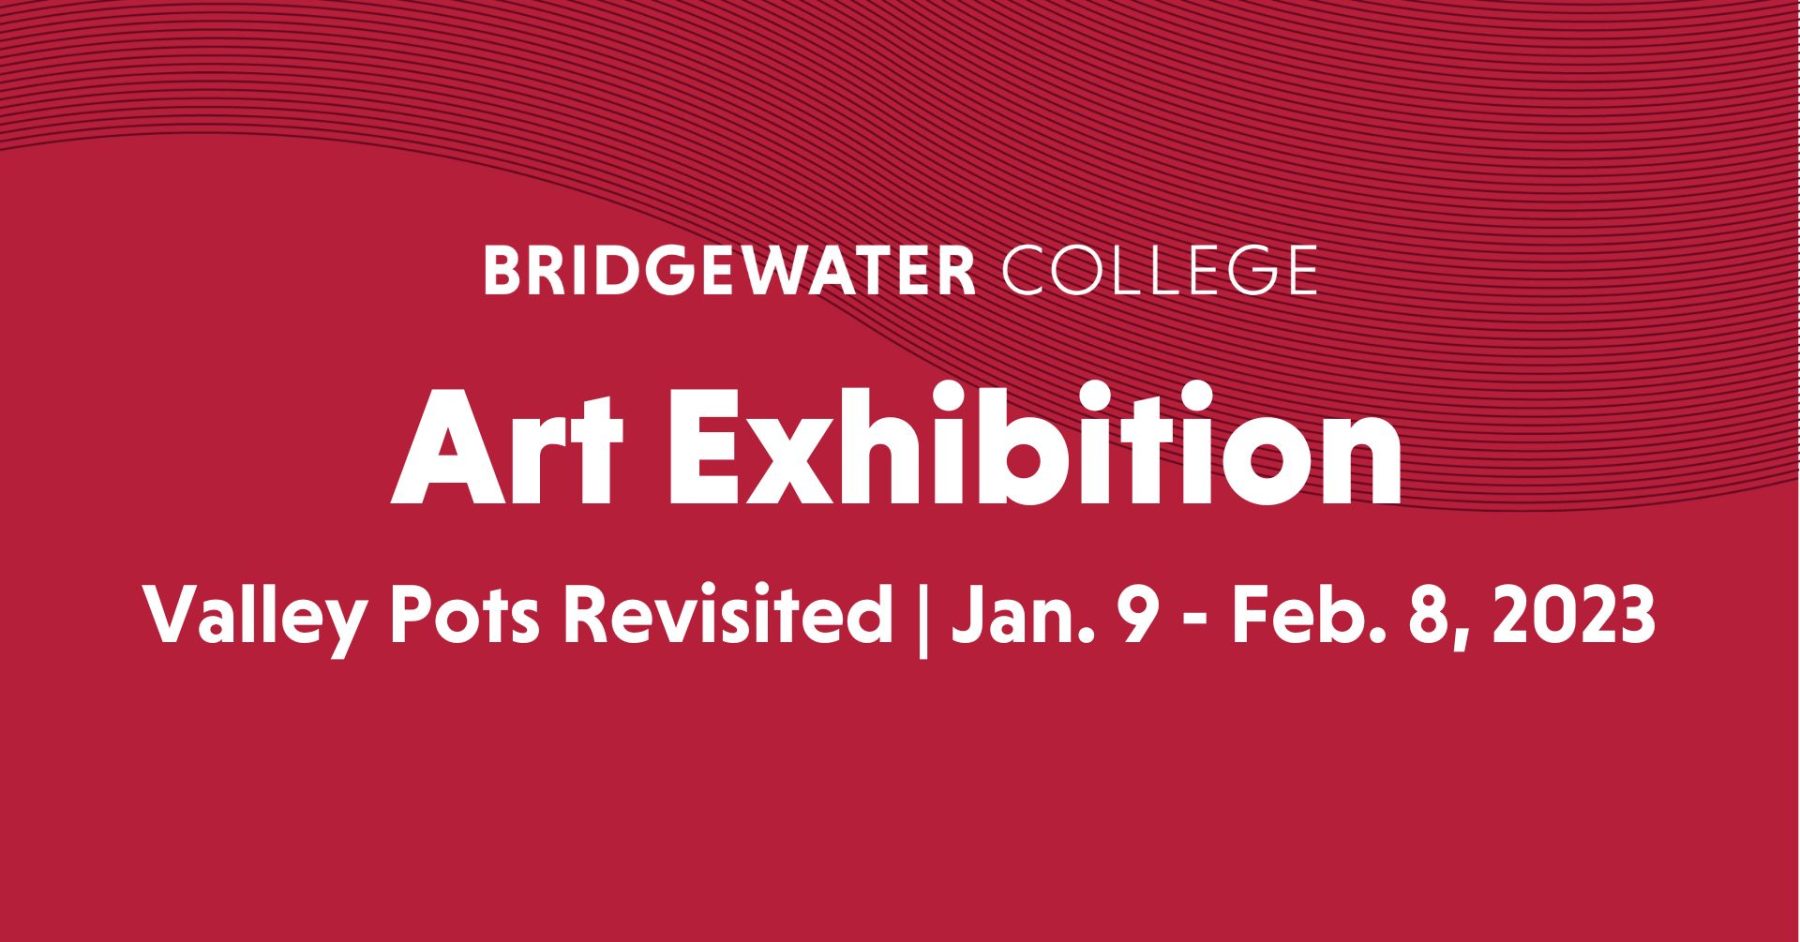 a red graphic that reads: Bridgewater College Art Exhibition Valley Pots Revisited Jan. 9 - Feb. 8